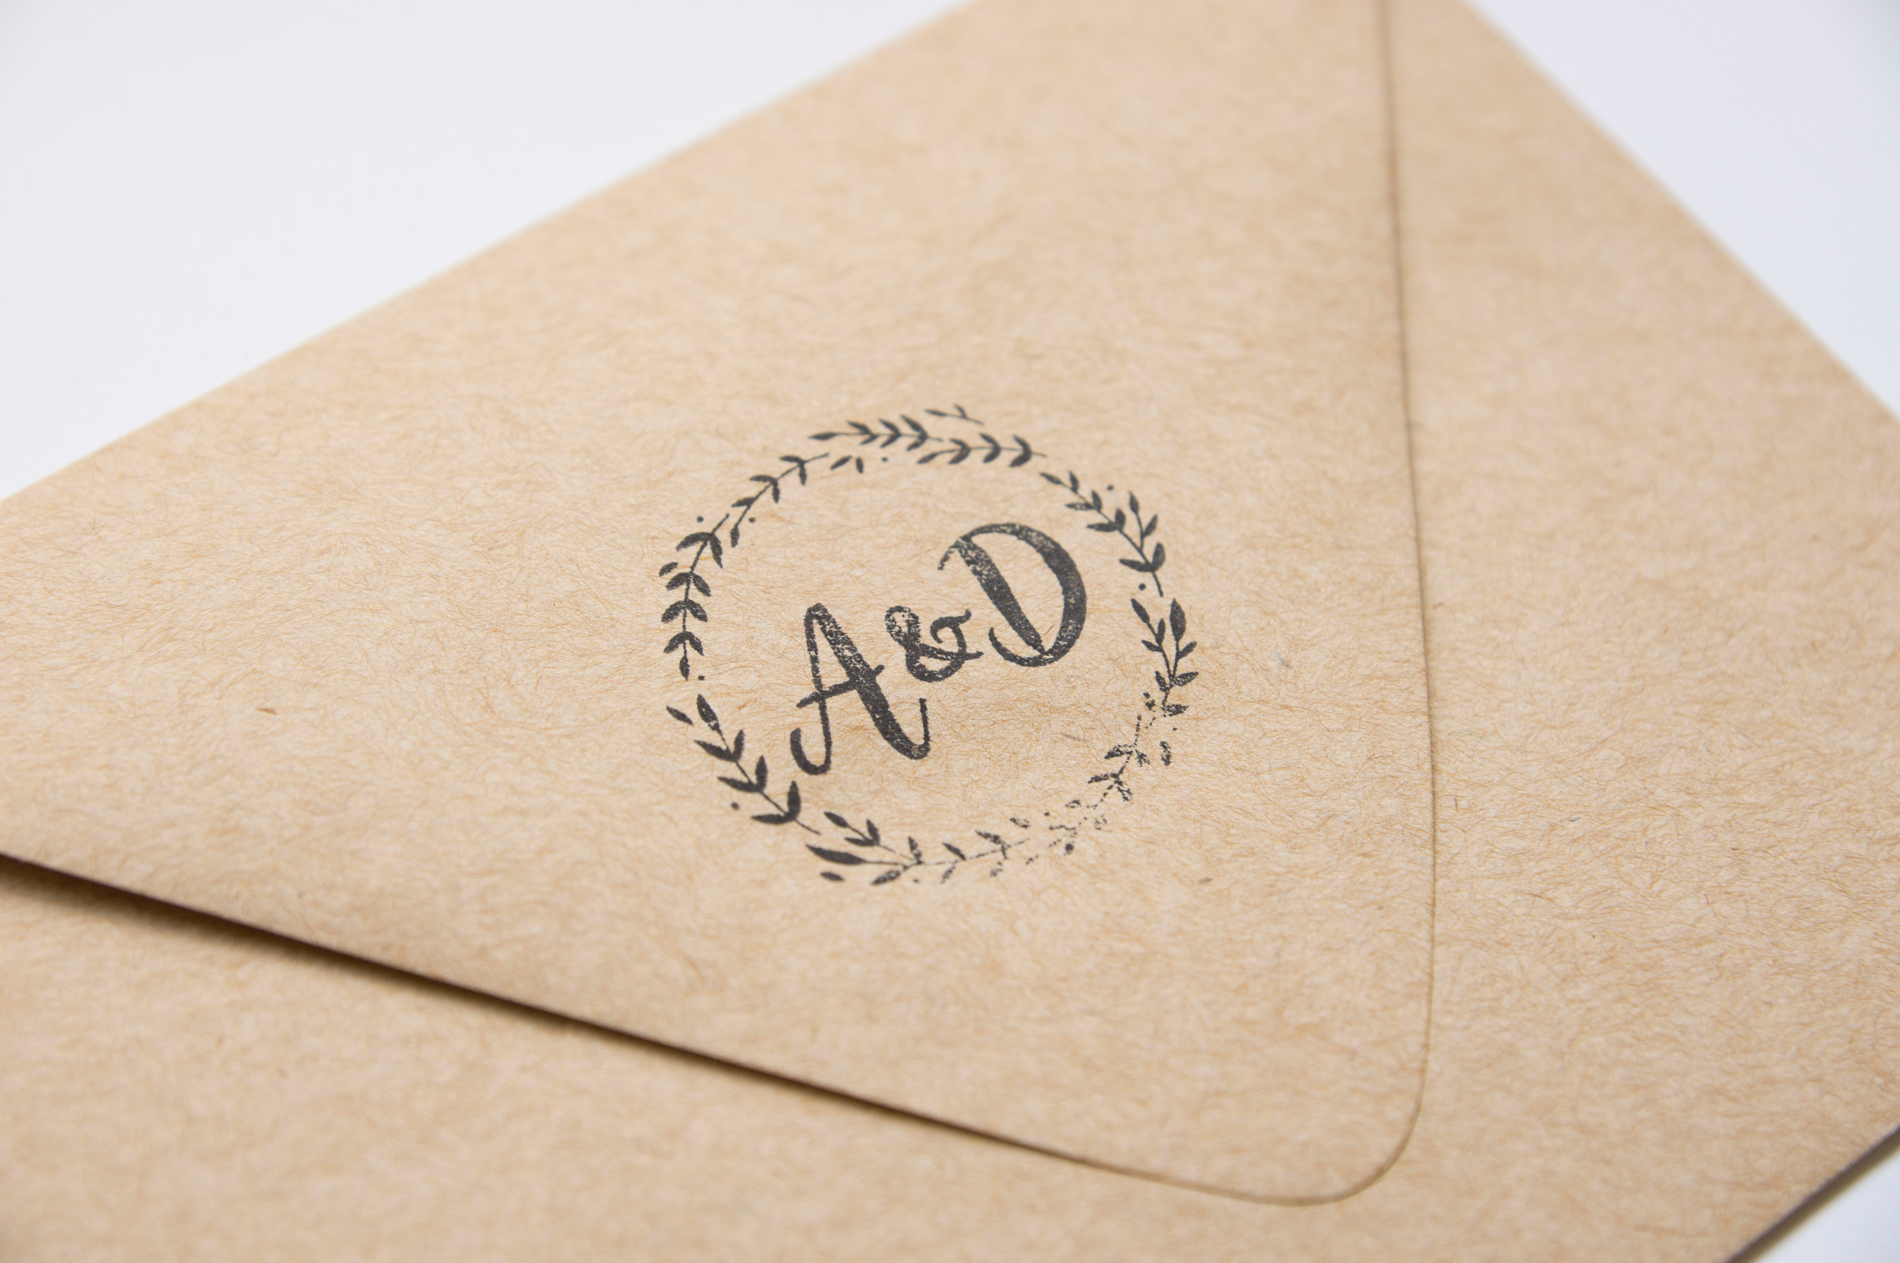 Personalized Envelope Stamp - A McCoy Equestrian Center Wedding - Peterson Design & Photography